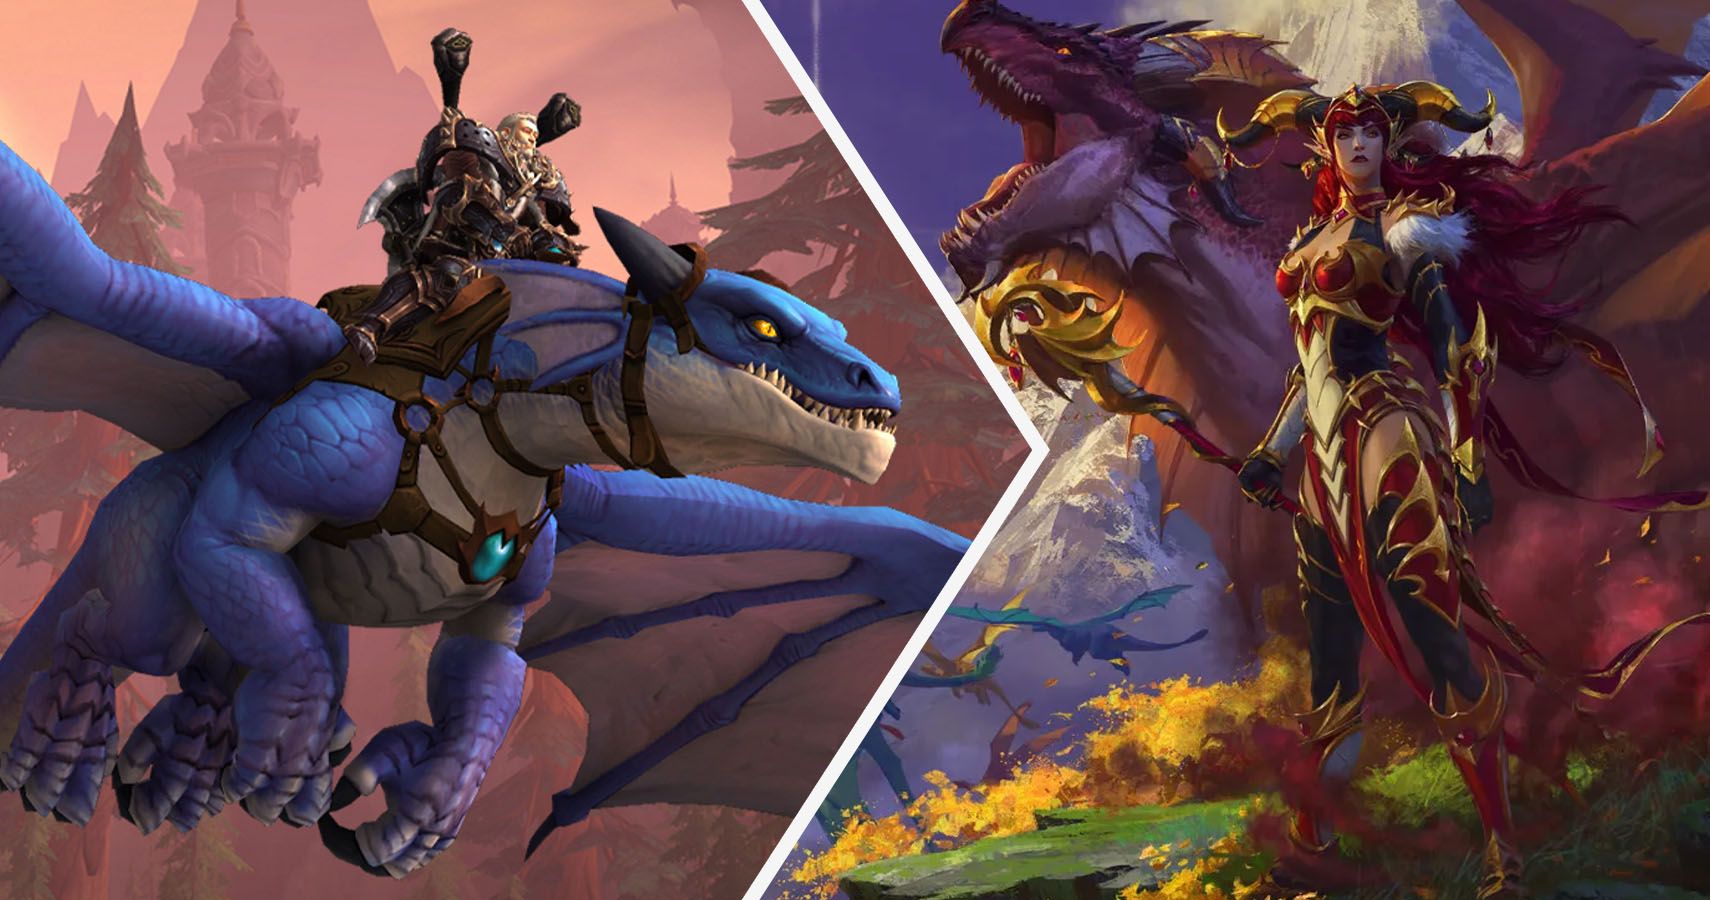 World of Warcraft: Dragonflight — Ultimate guide to everything we